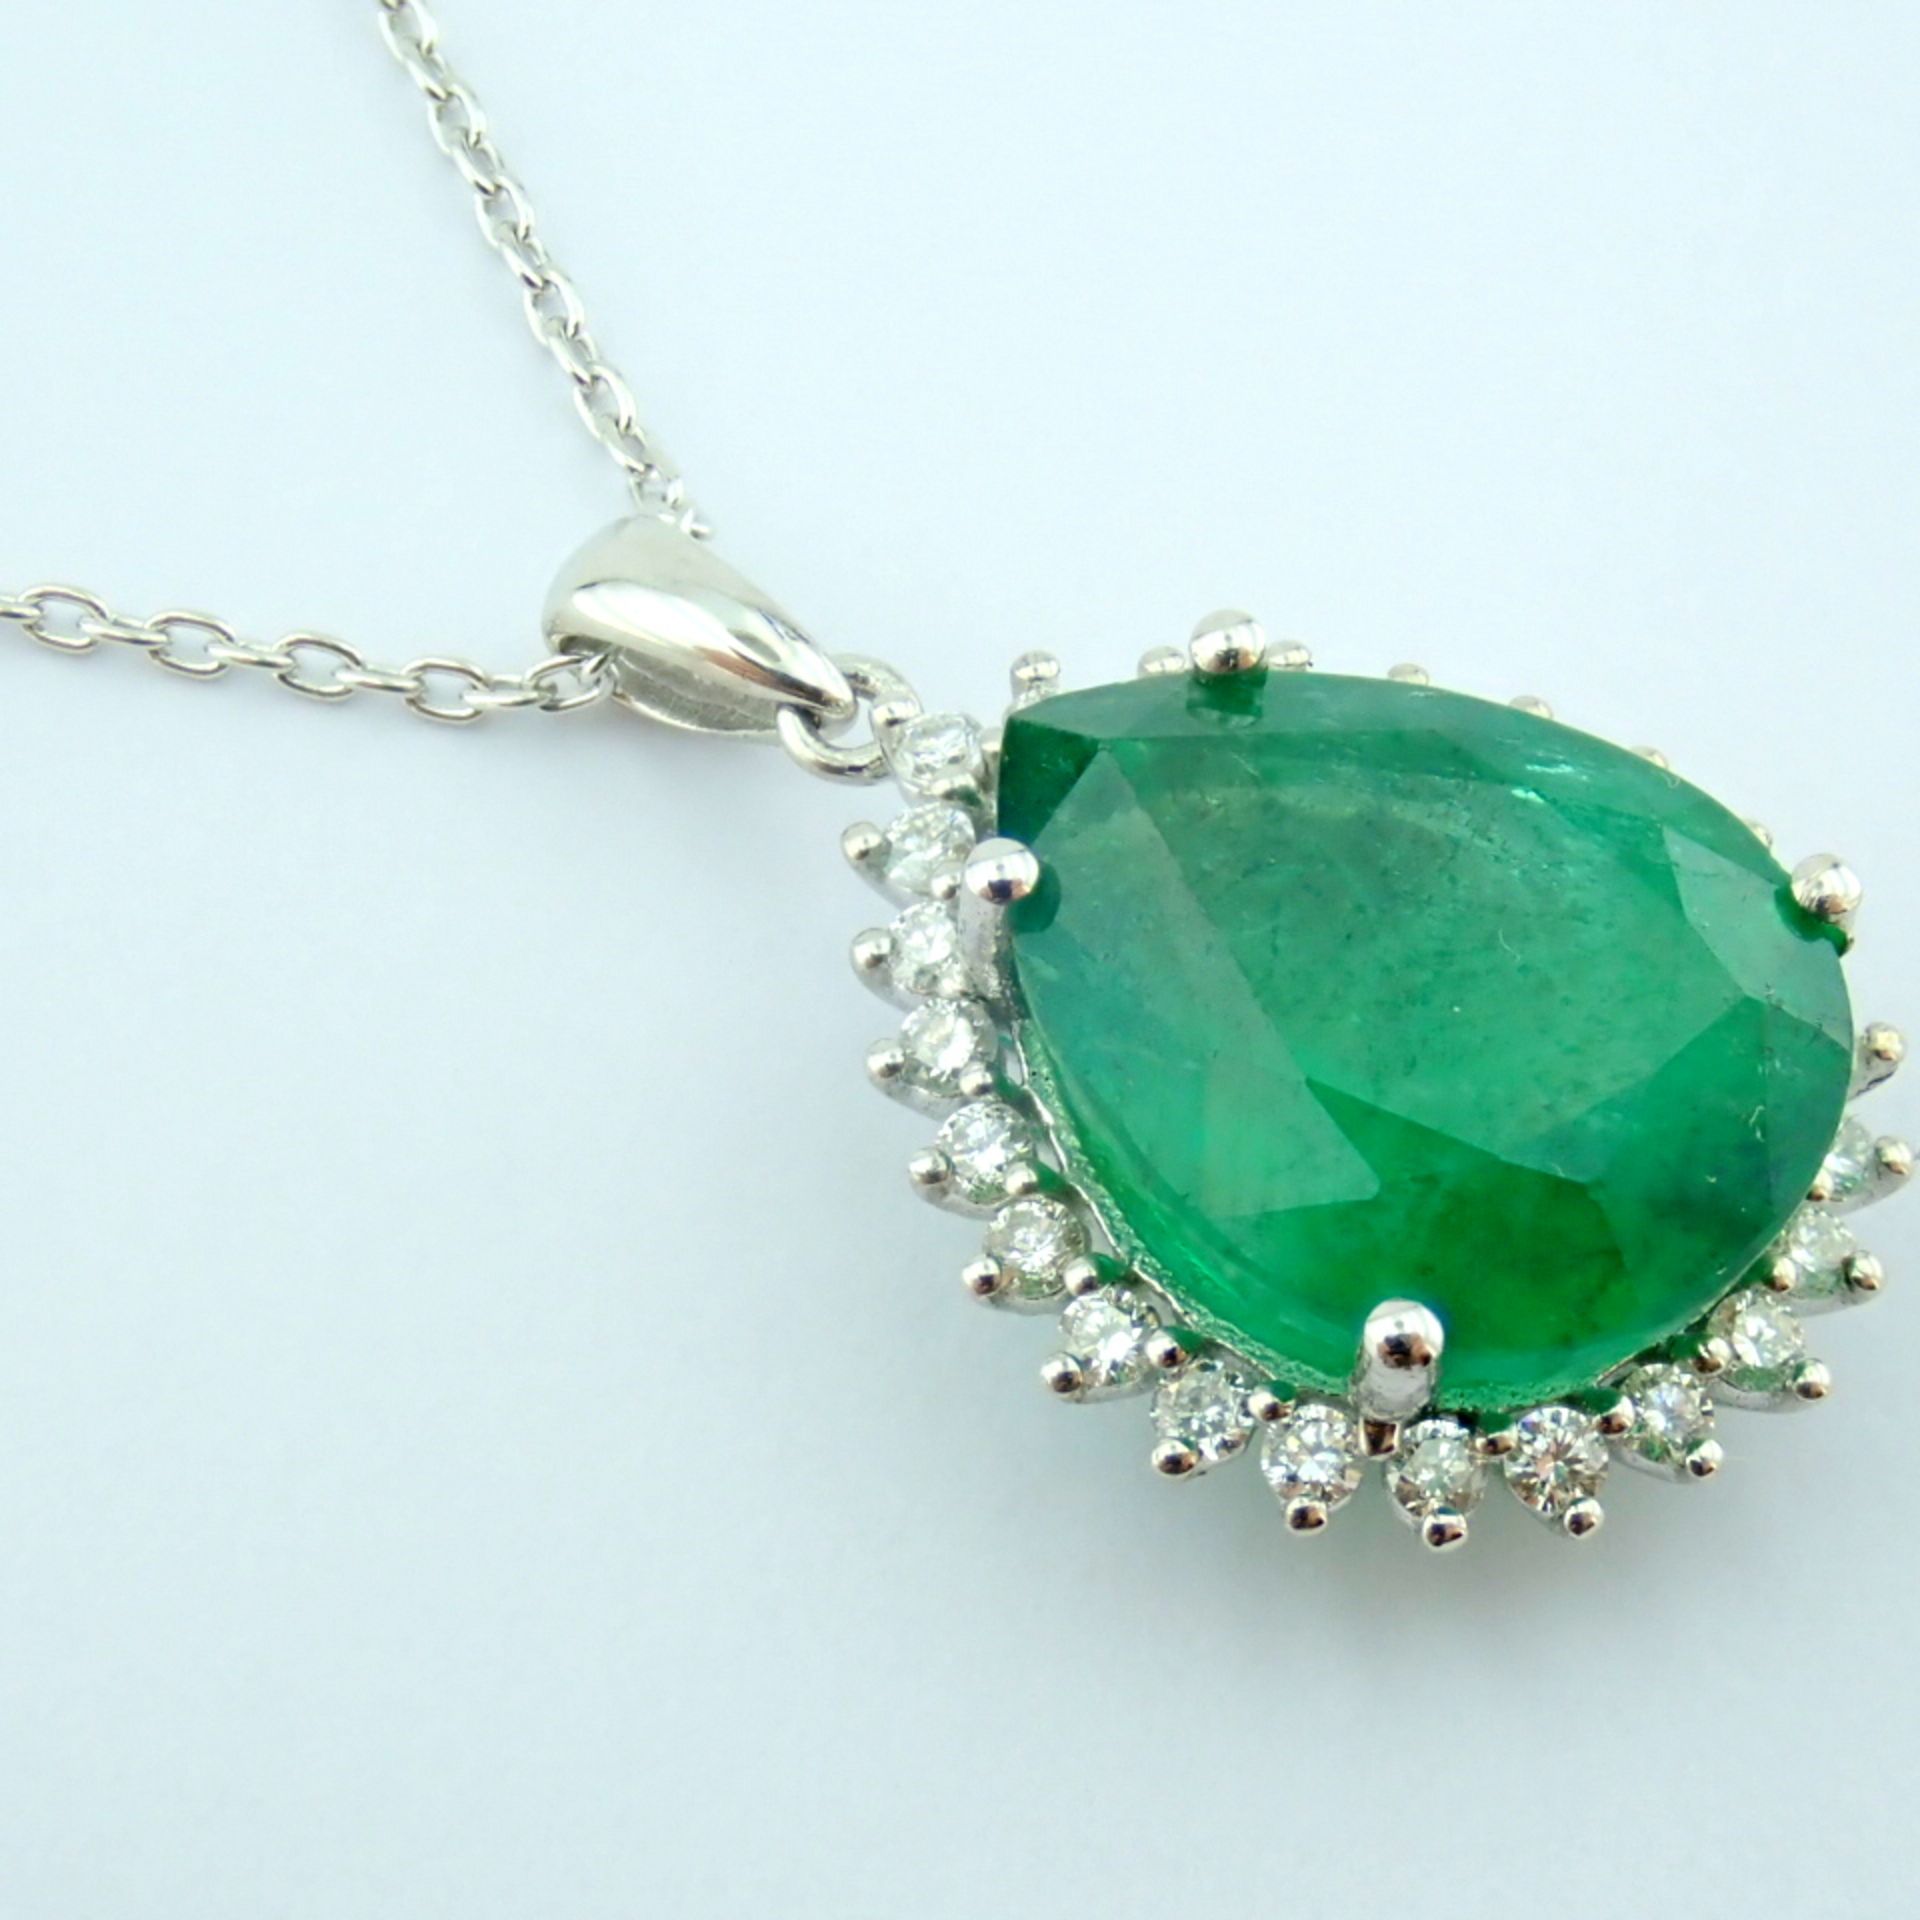 Certificated 14K White Gold Diamond & Emerald Necklace - Image 10 of 12